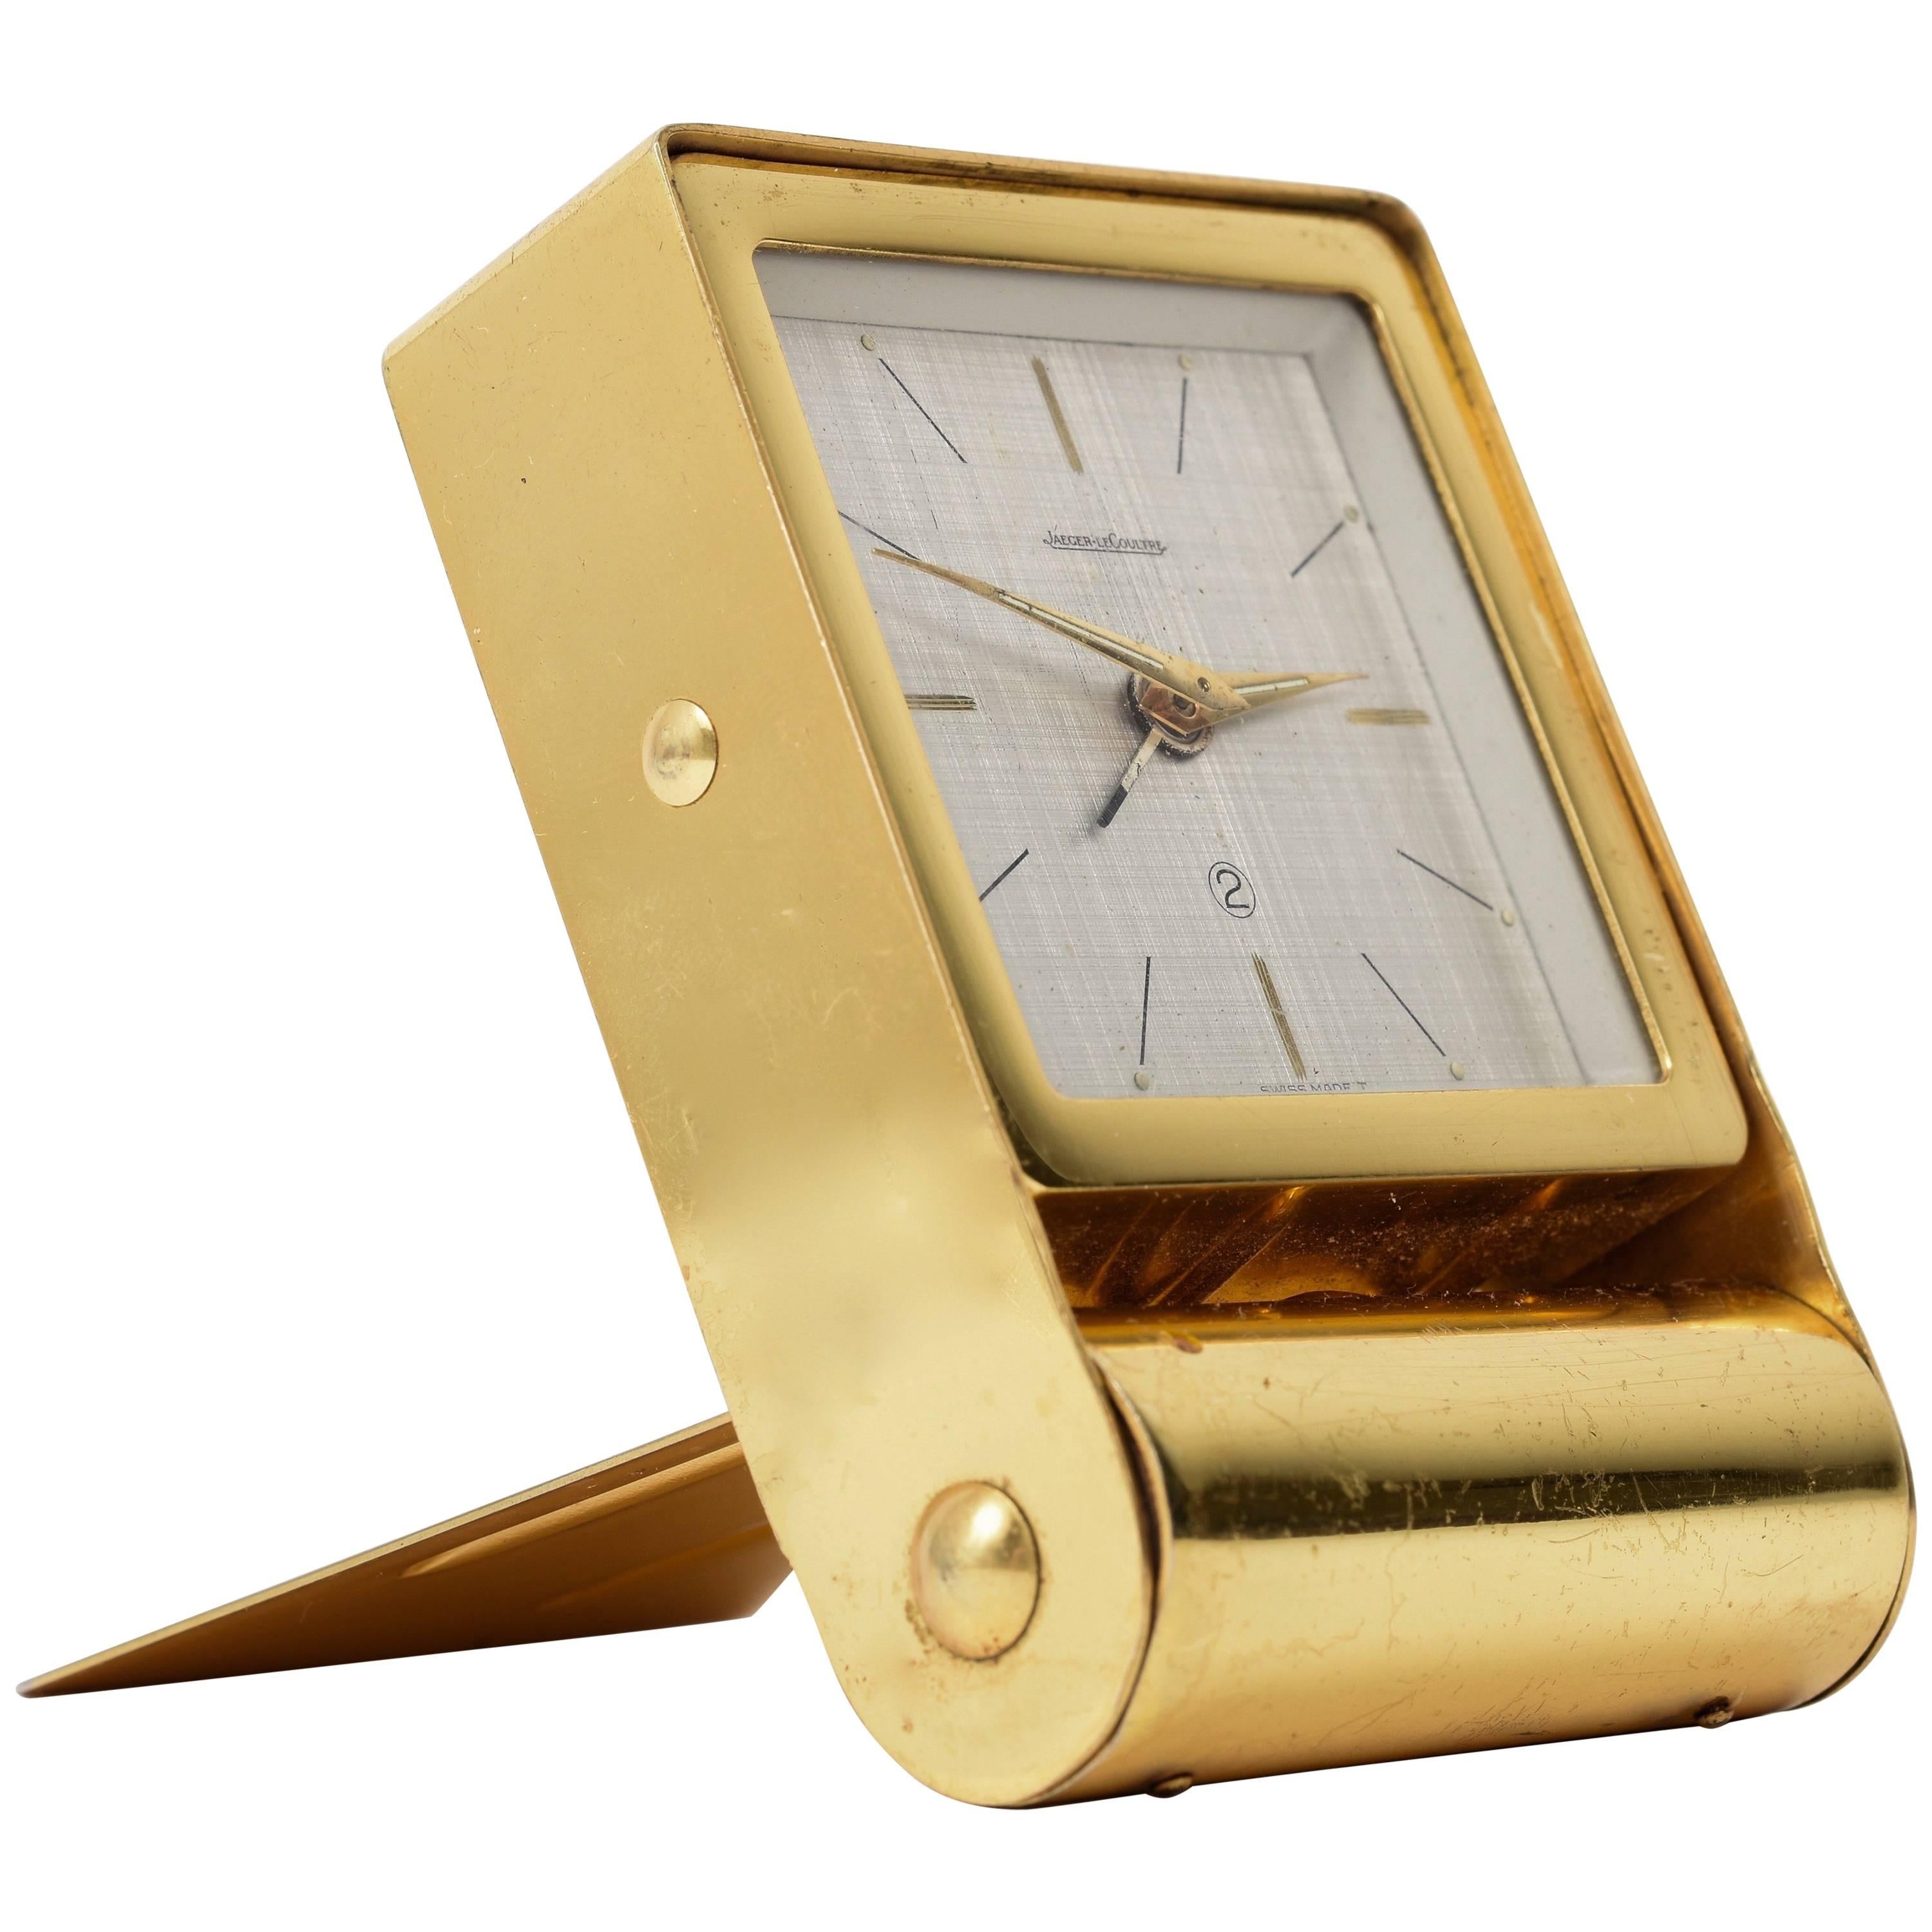 Jaeger Le Coultre Travel Alarm, Table Clock Gold-Plated Metal, Switzerland